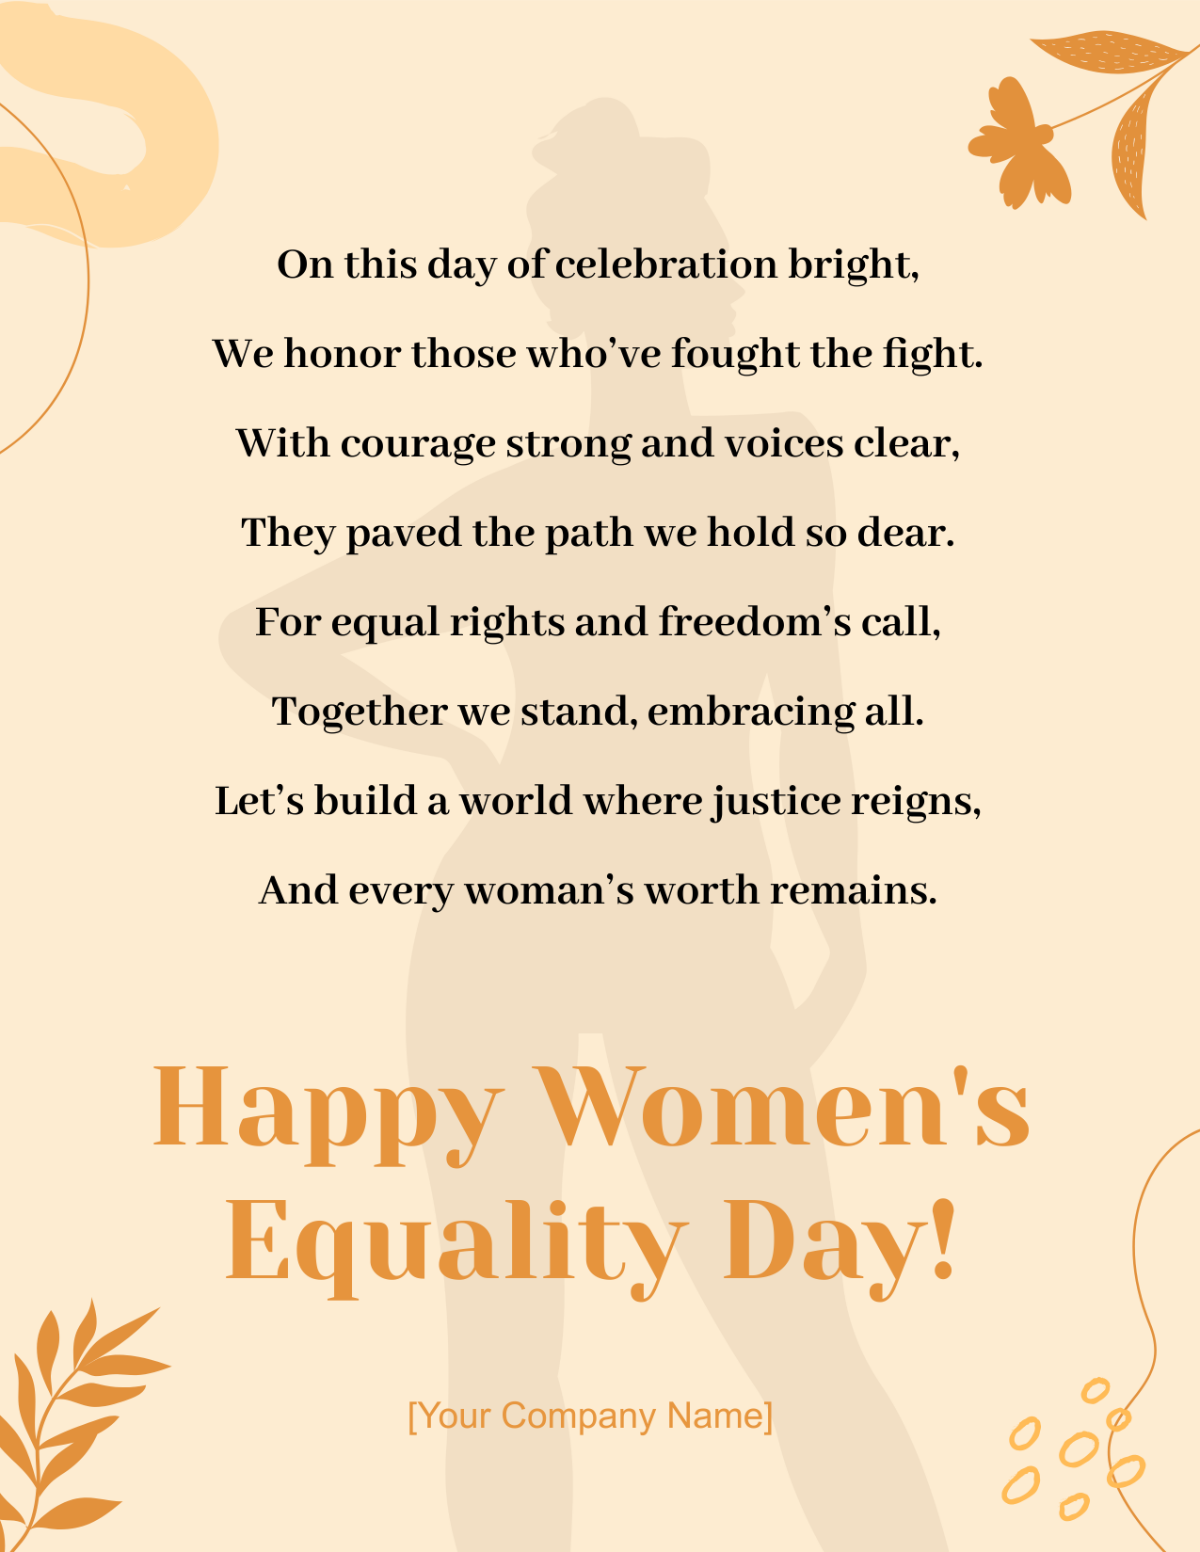 Women's Equality Day Poem